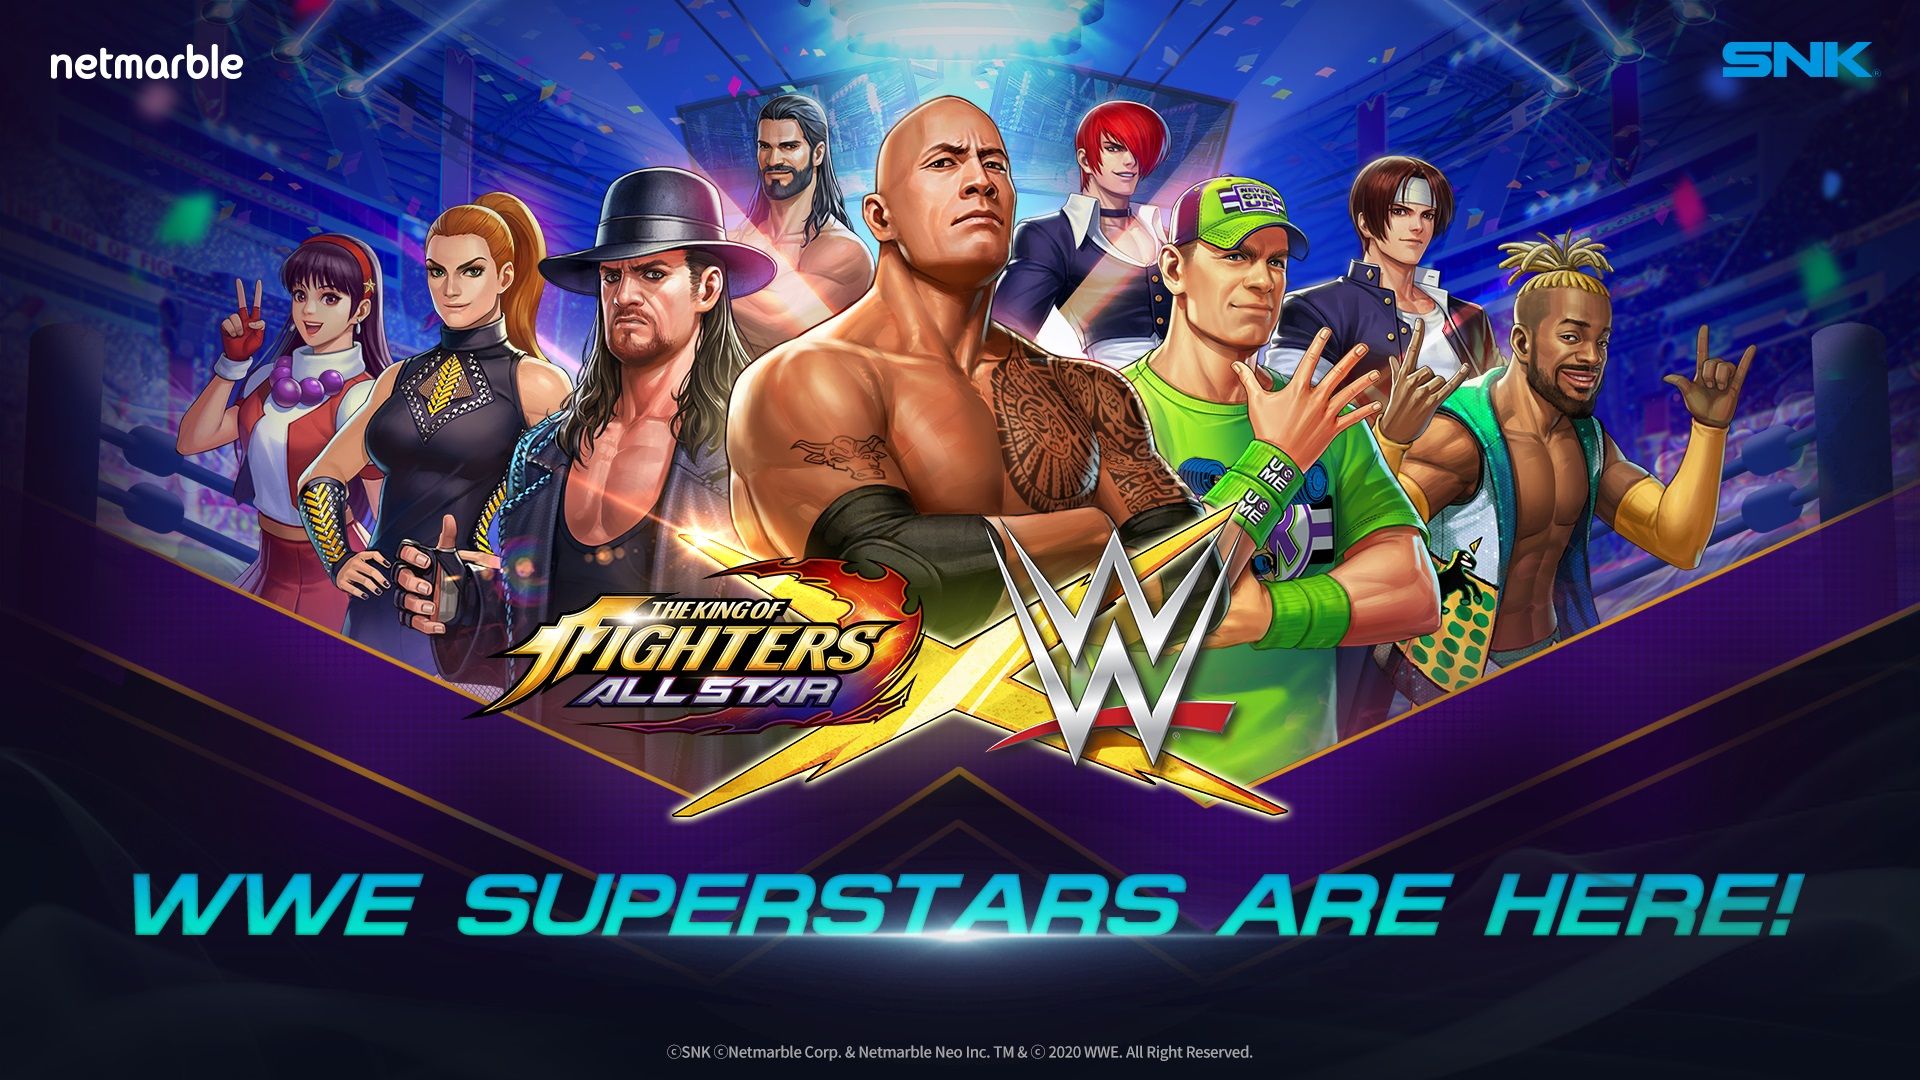 The King of Fighters ALLSTAR enters the ring with WWE Superstars